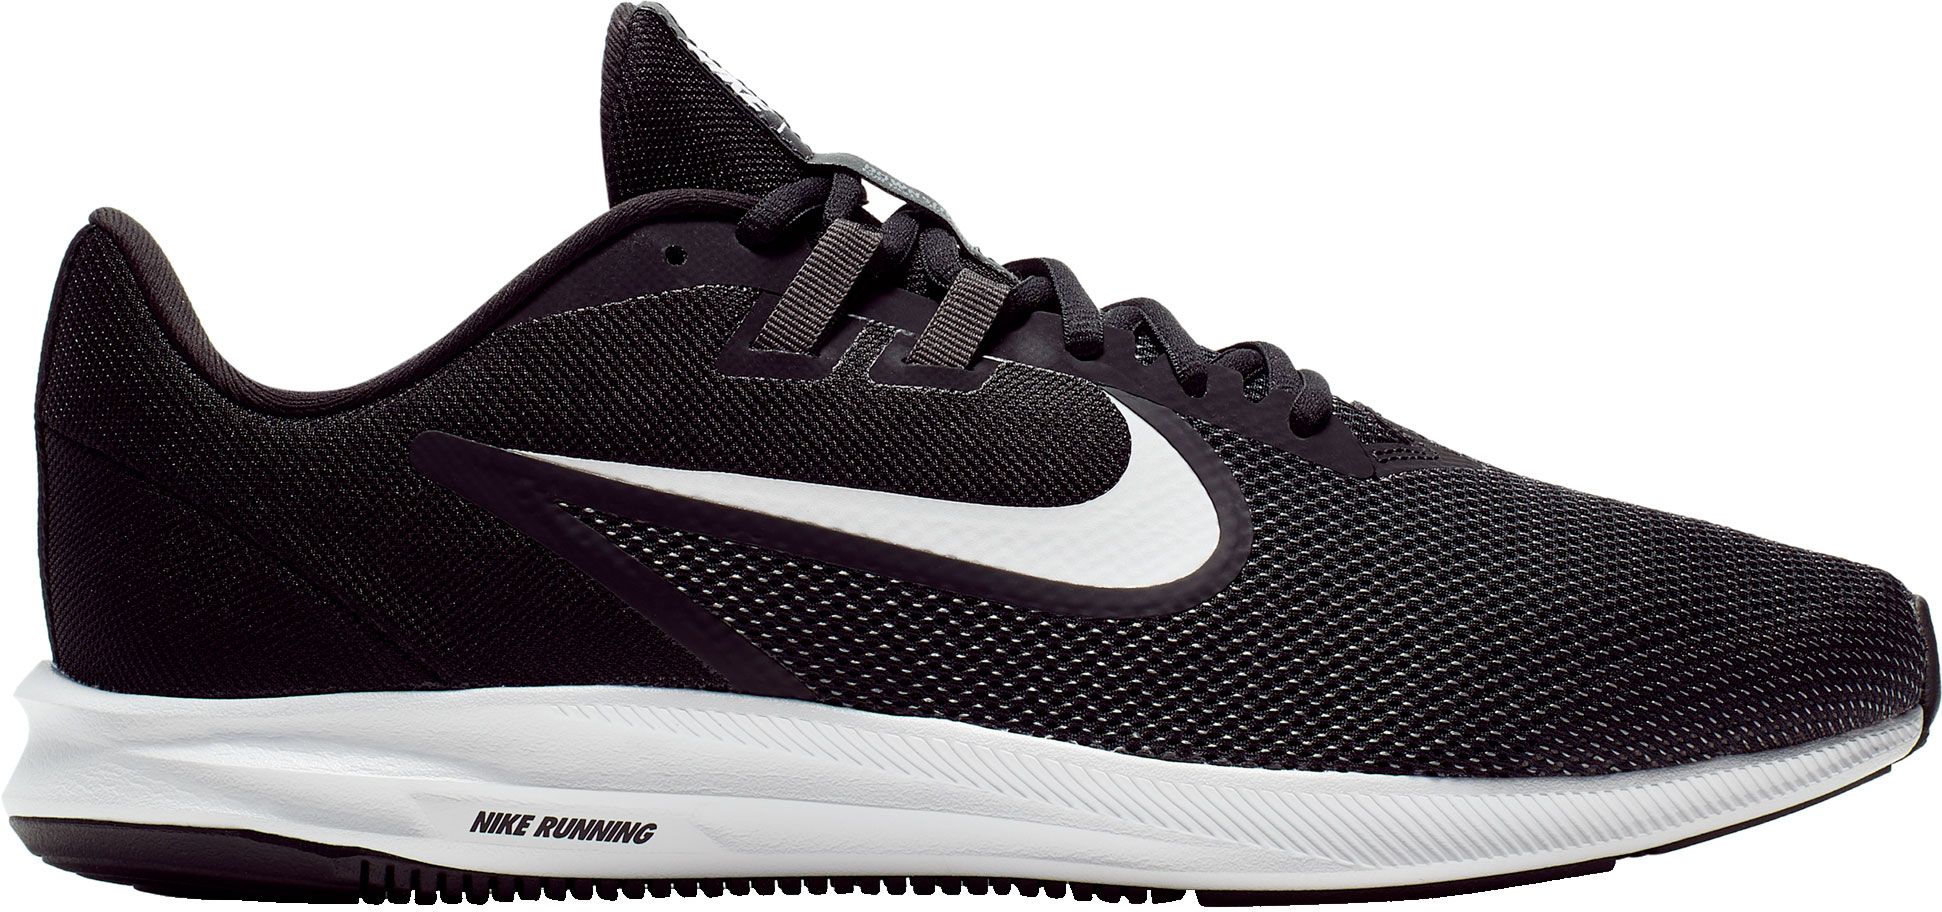 Nike Men's Downshifter 9 Running Shoes | Free Curbside Pick Up at DICK'S